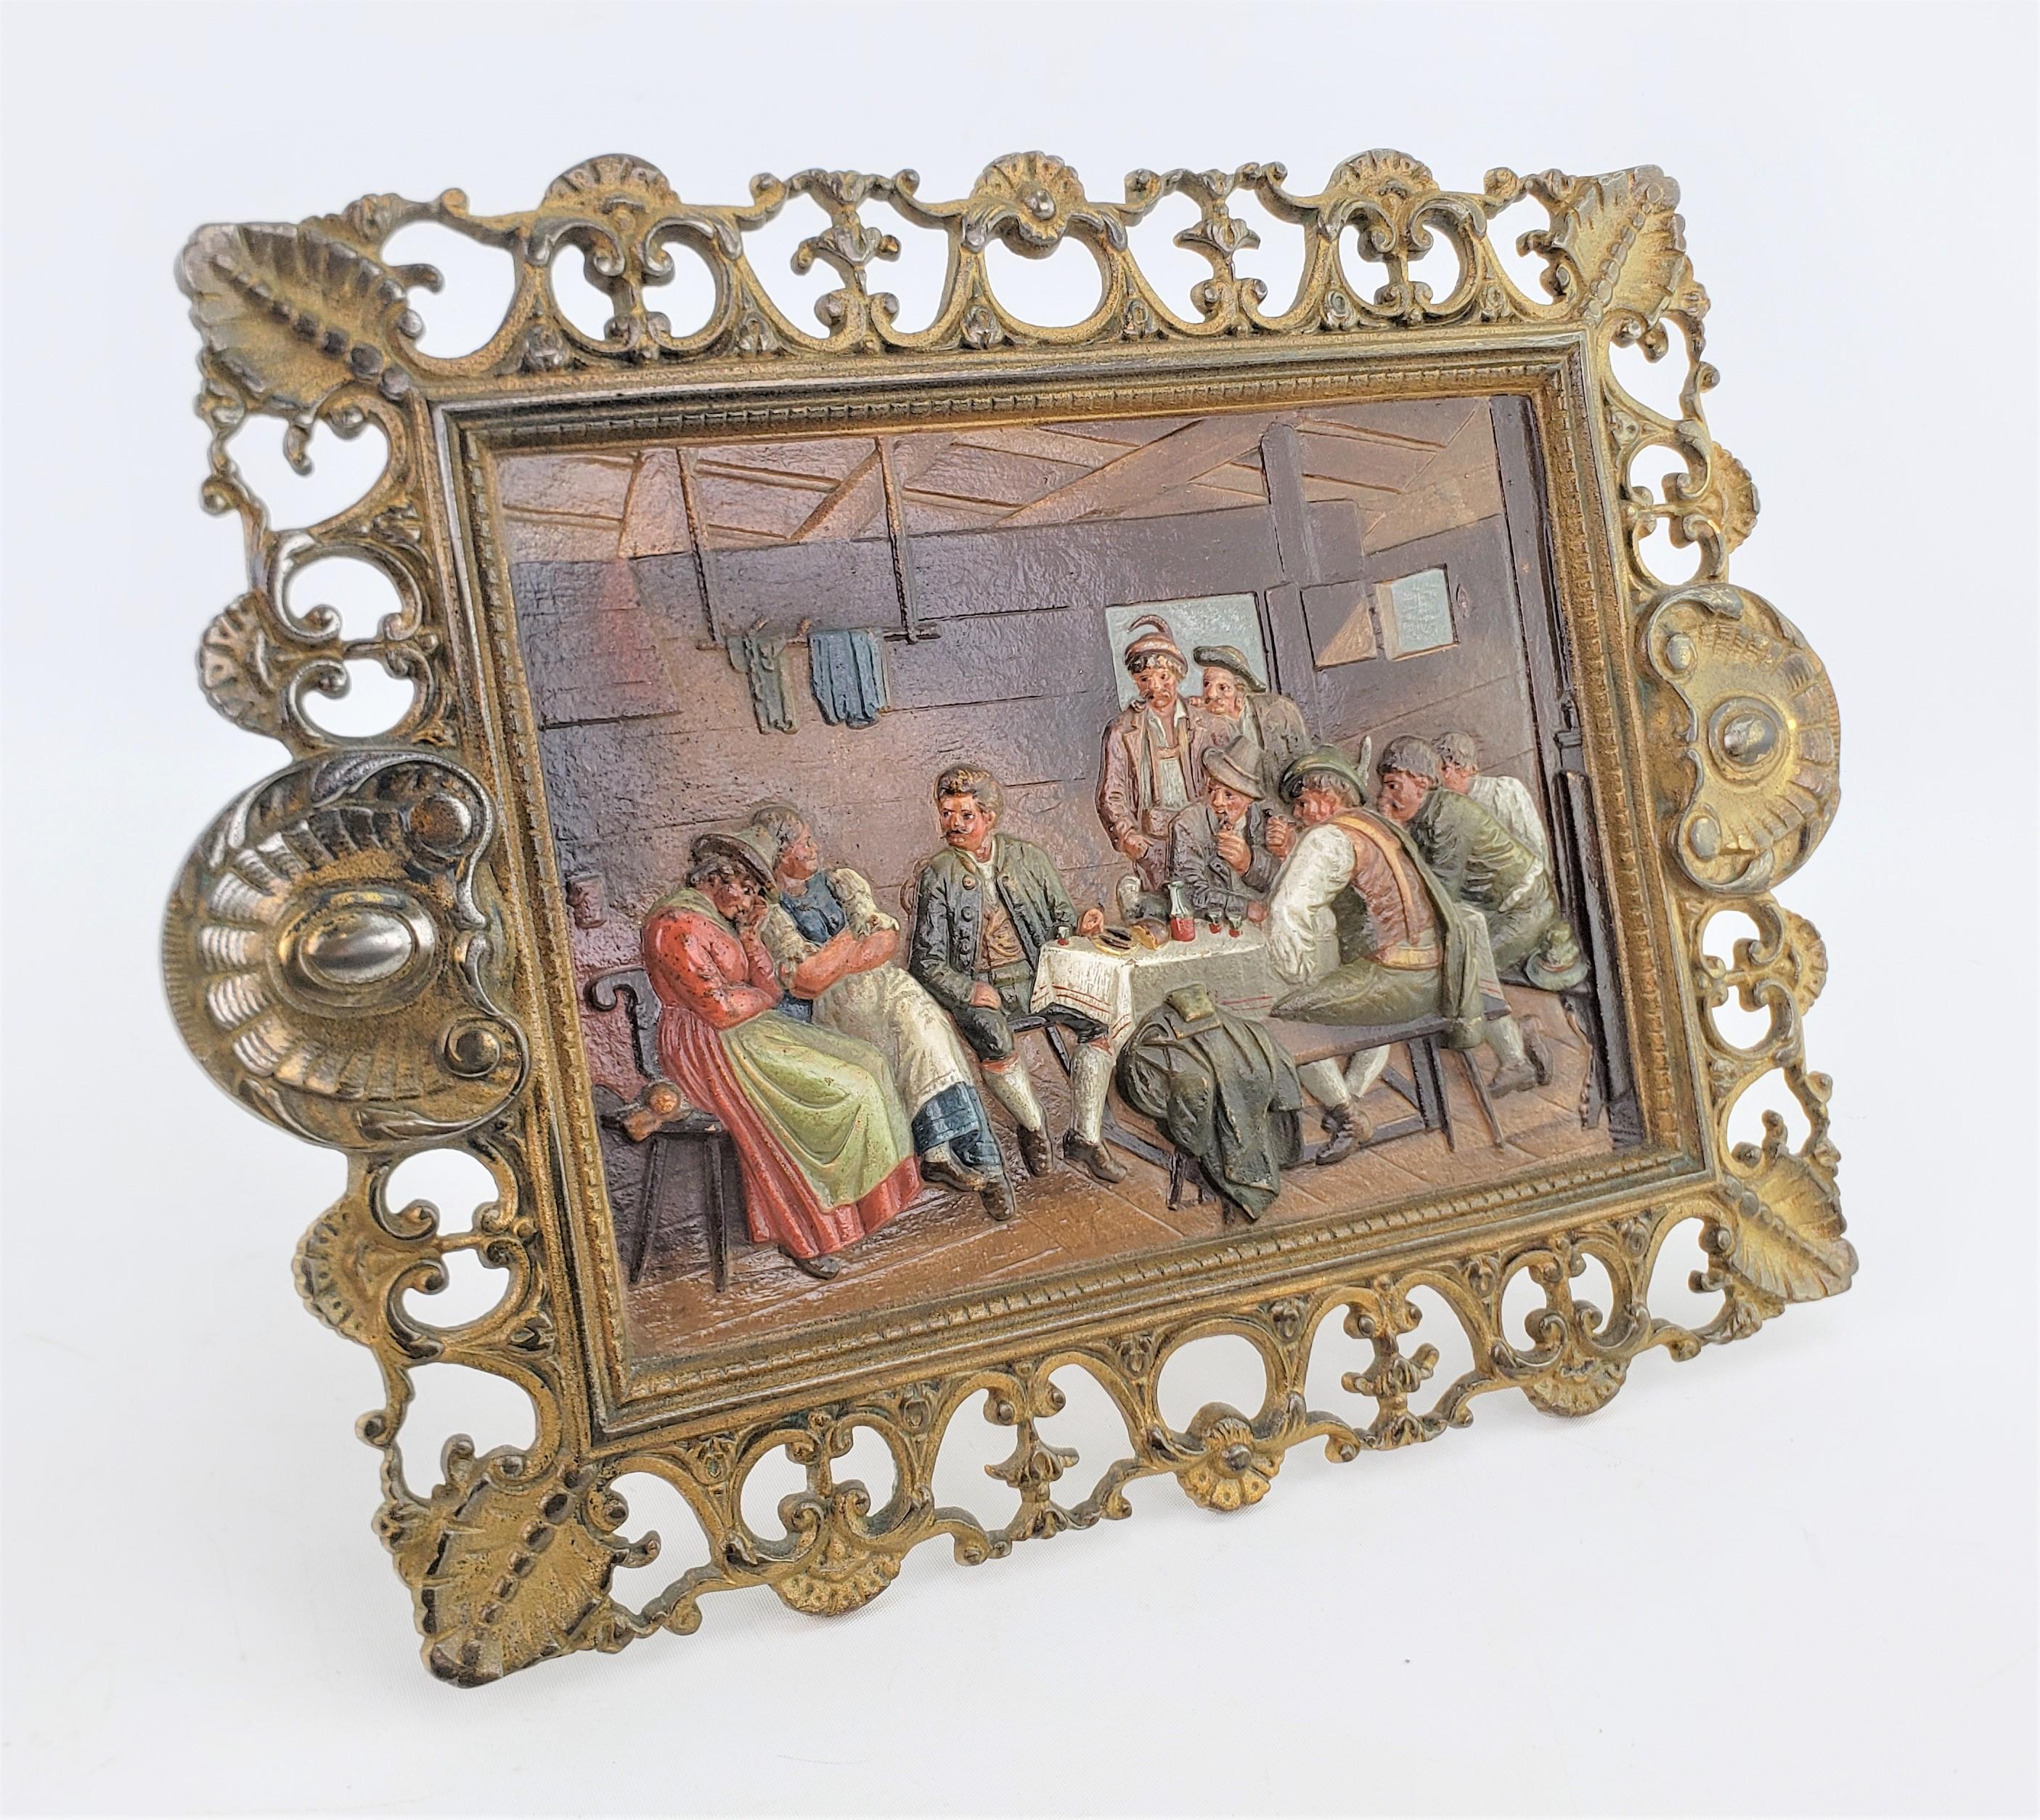 This antique cast and cold-painted metal plaque was done by the renowned Bradley & Hubbard of the United States in approximately 1920 in an American Colonial style. The plaque is done in a cast metal with a very elaborate frame which has been given